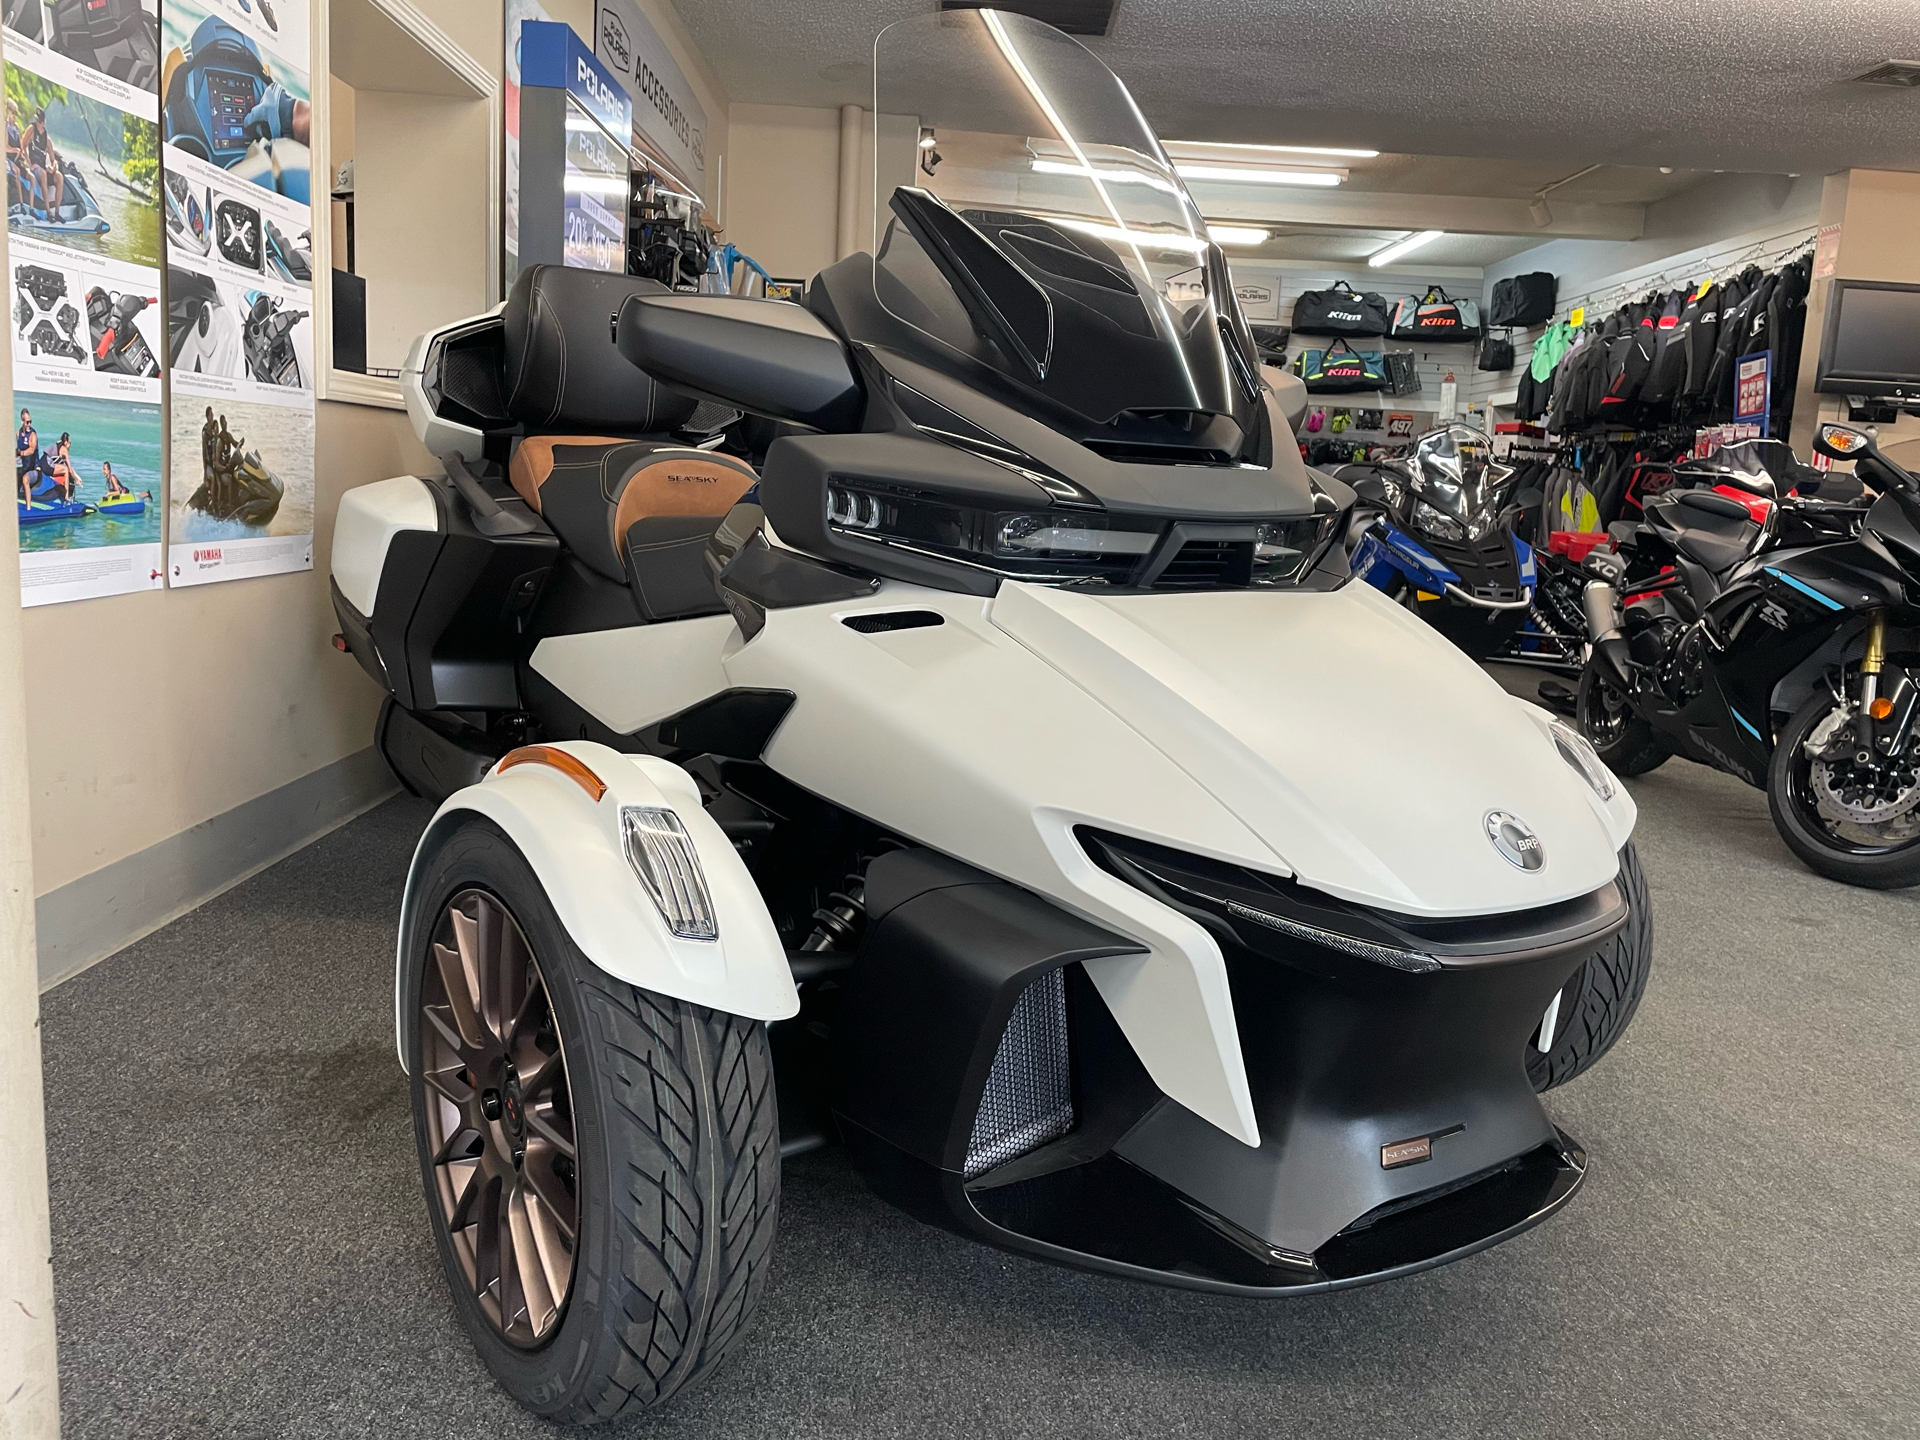 2024 Can-Am Spyder RT Sea-to-Sky in North Chelmsford, Massachusetts - Photo 6